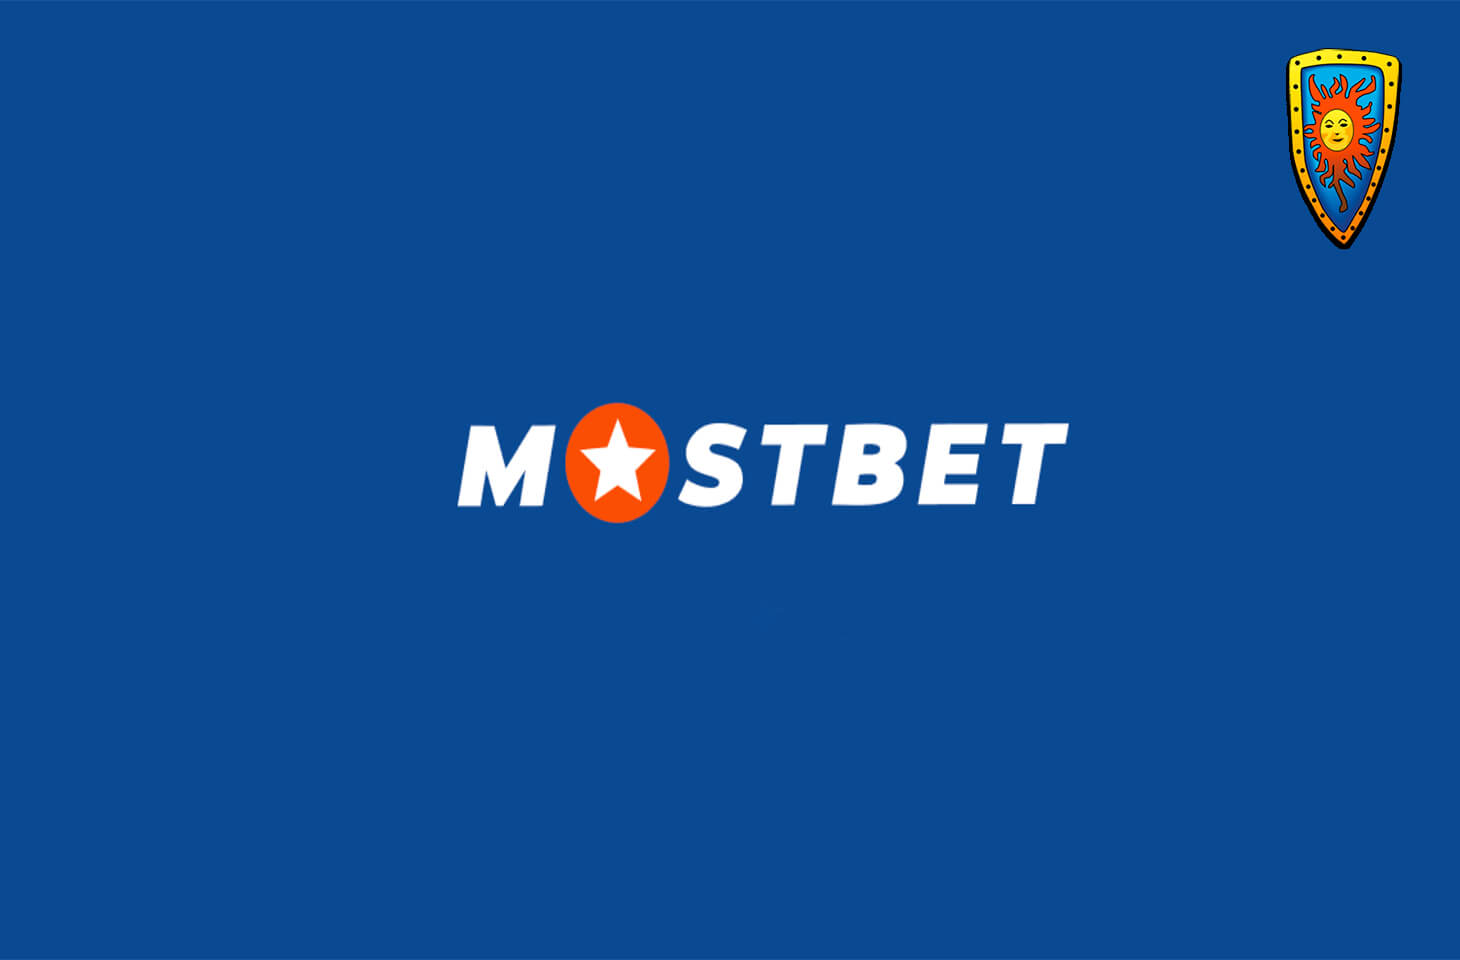 Can You Really Find Experience Excellence with MostBet on the Web?